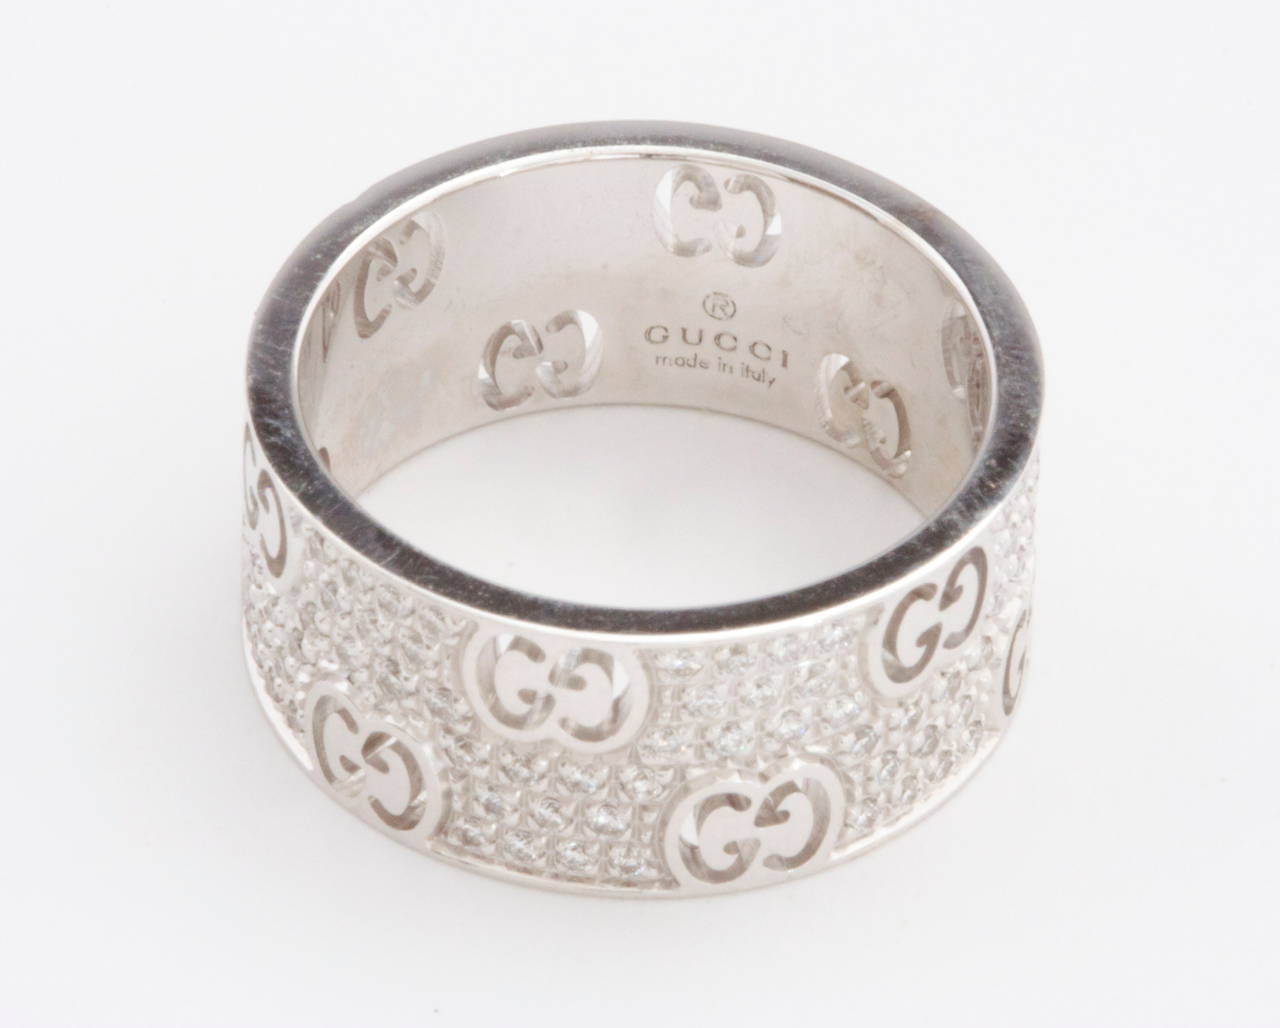 The identifiable Gucci logo cannot be mistaken and this beautiful creation has  a lovely modern twist. Designed with six rows of clean, white pave set diamonds that have been separated by the classic GG engraving strategically placed throughout.